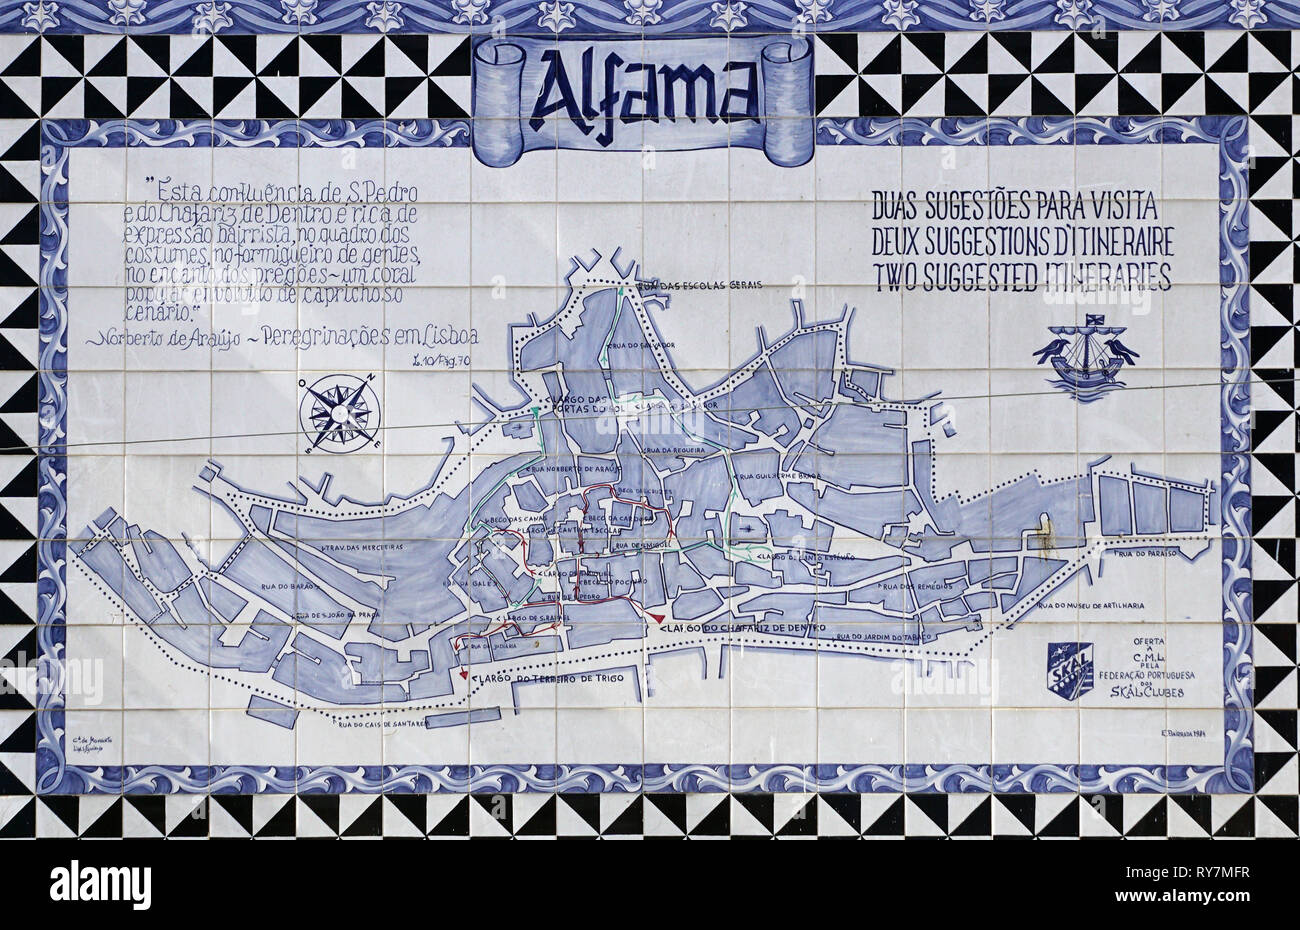 Roadmap of Alfama from tiles in Lisbon, Portugal Stock Photo